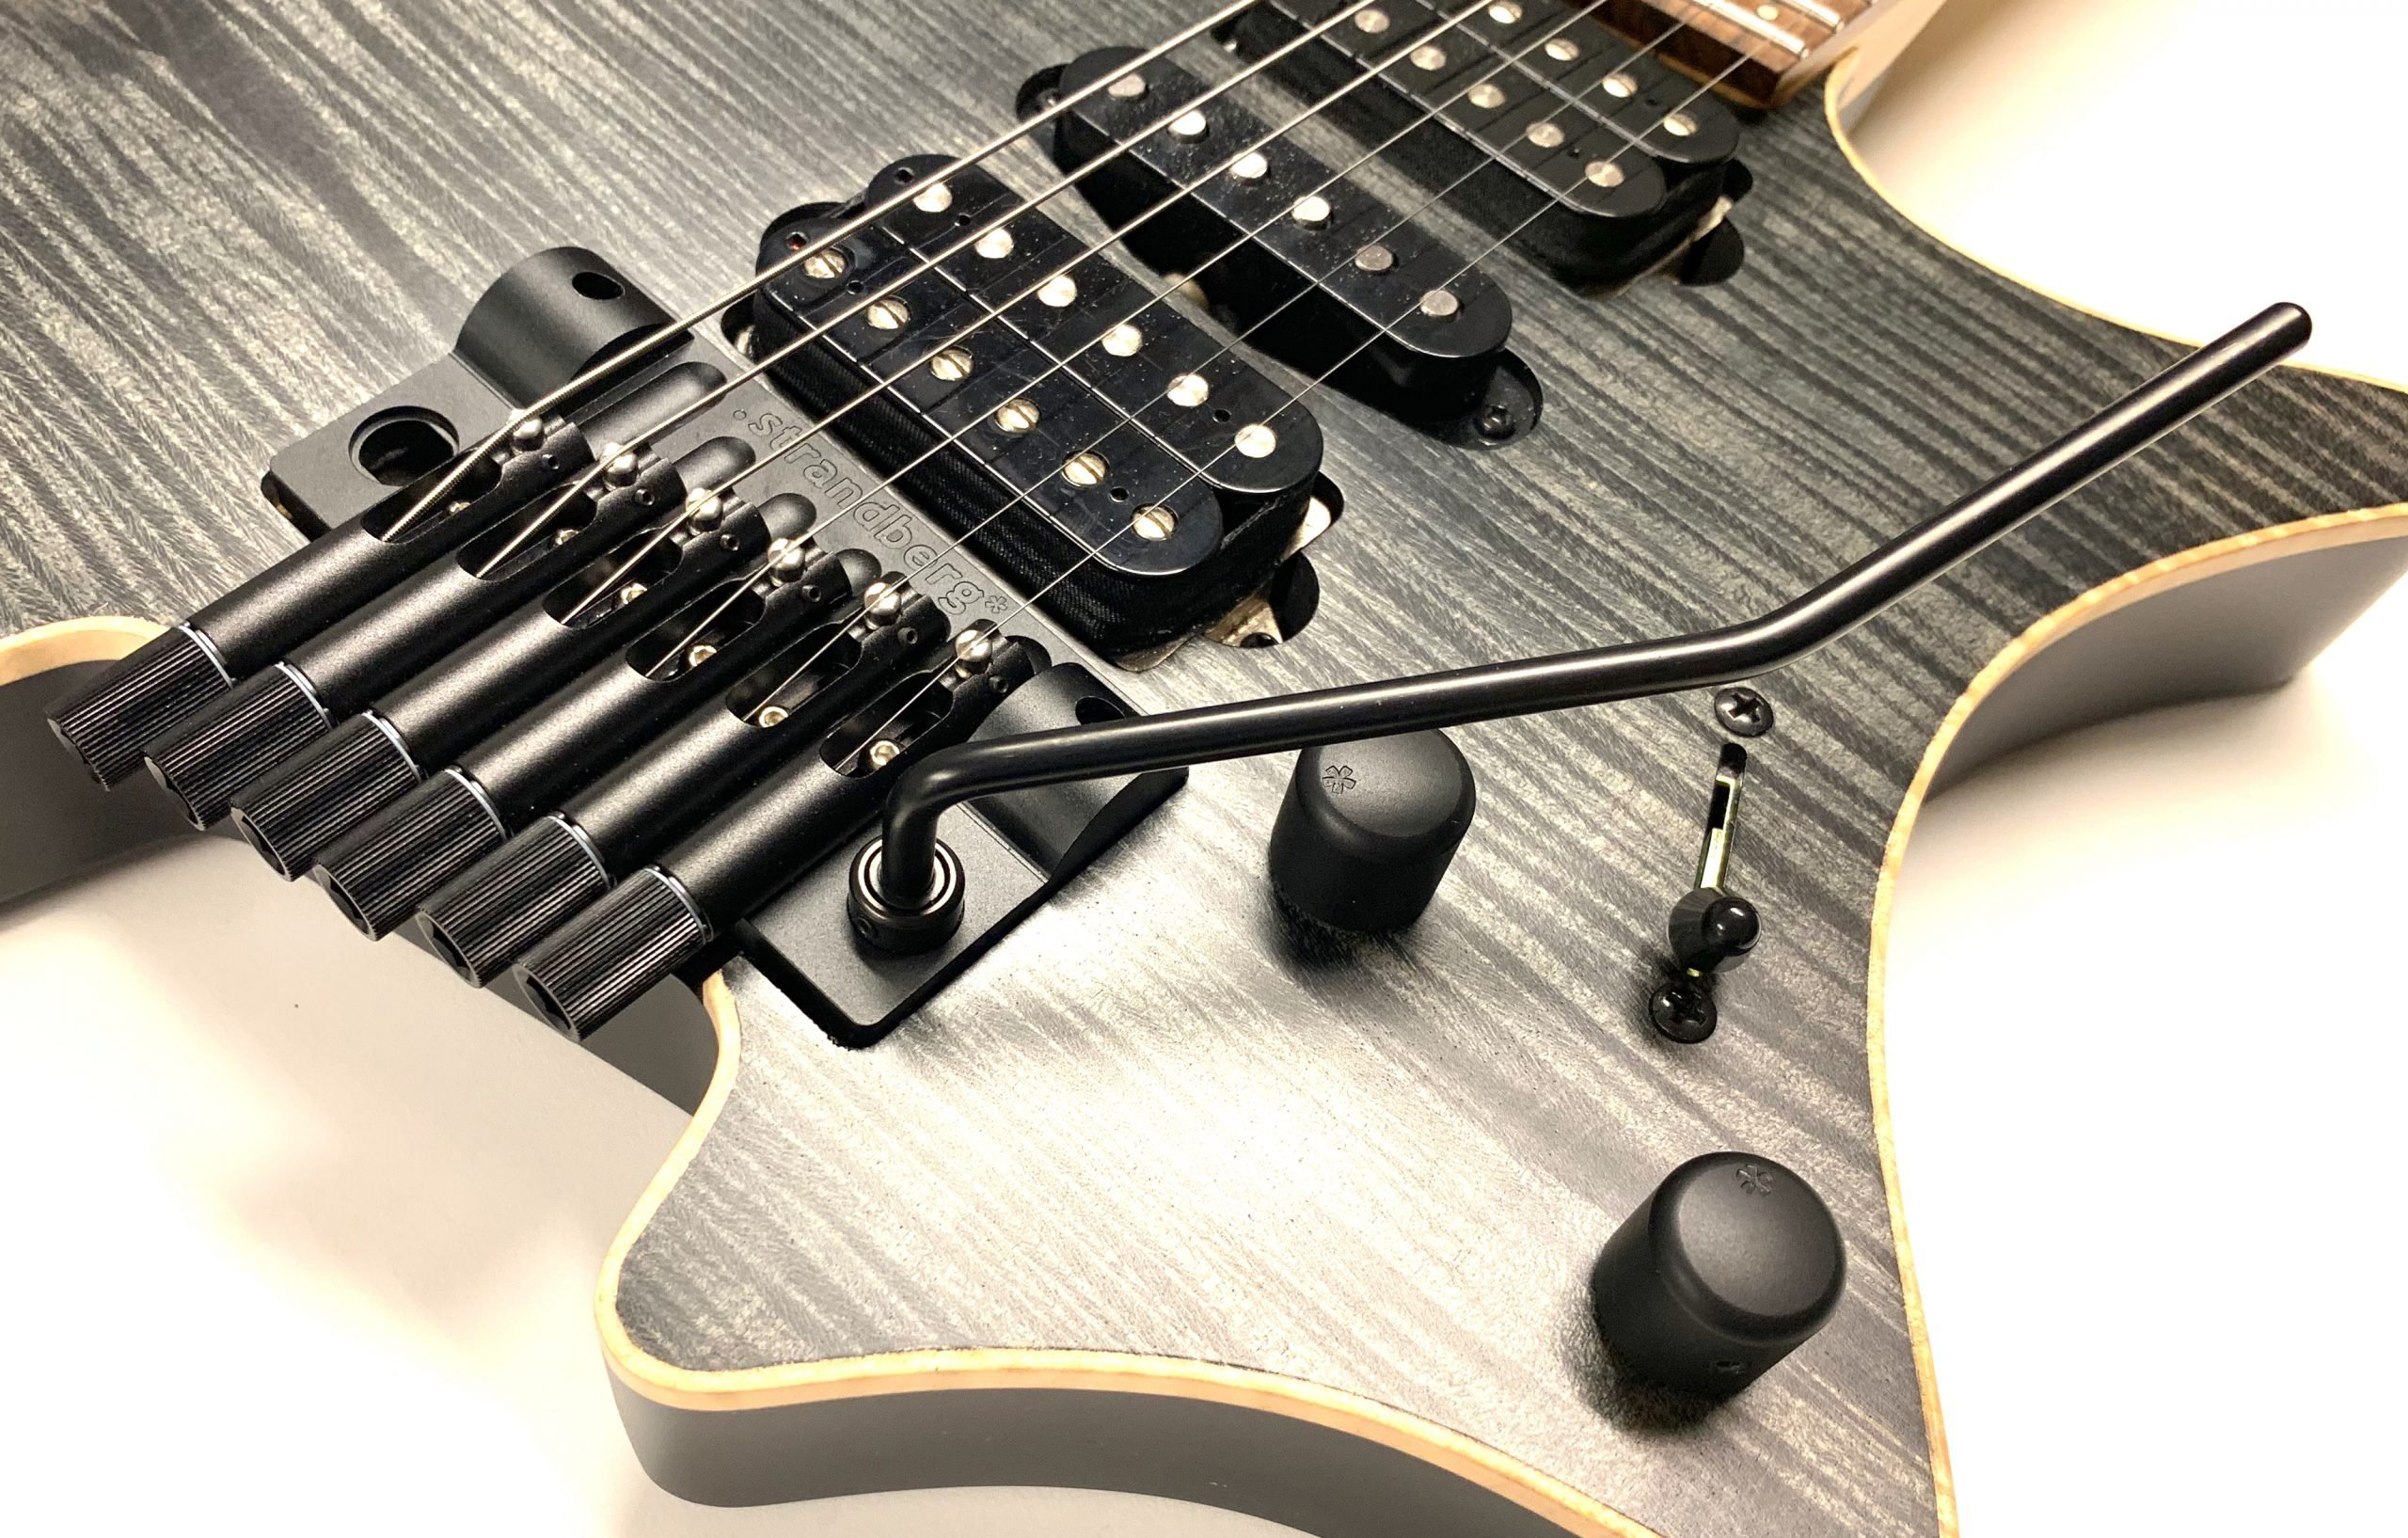 How to setup and use the .strandberg* EGS series 5 tremolo system 